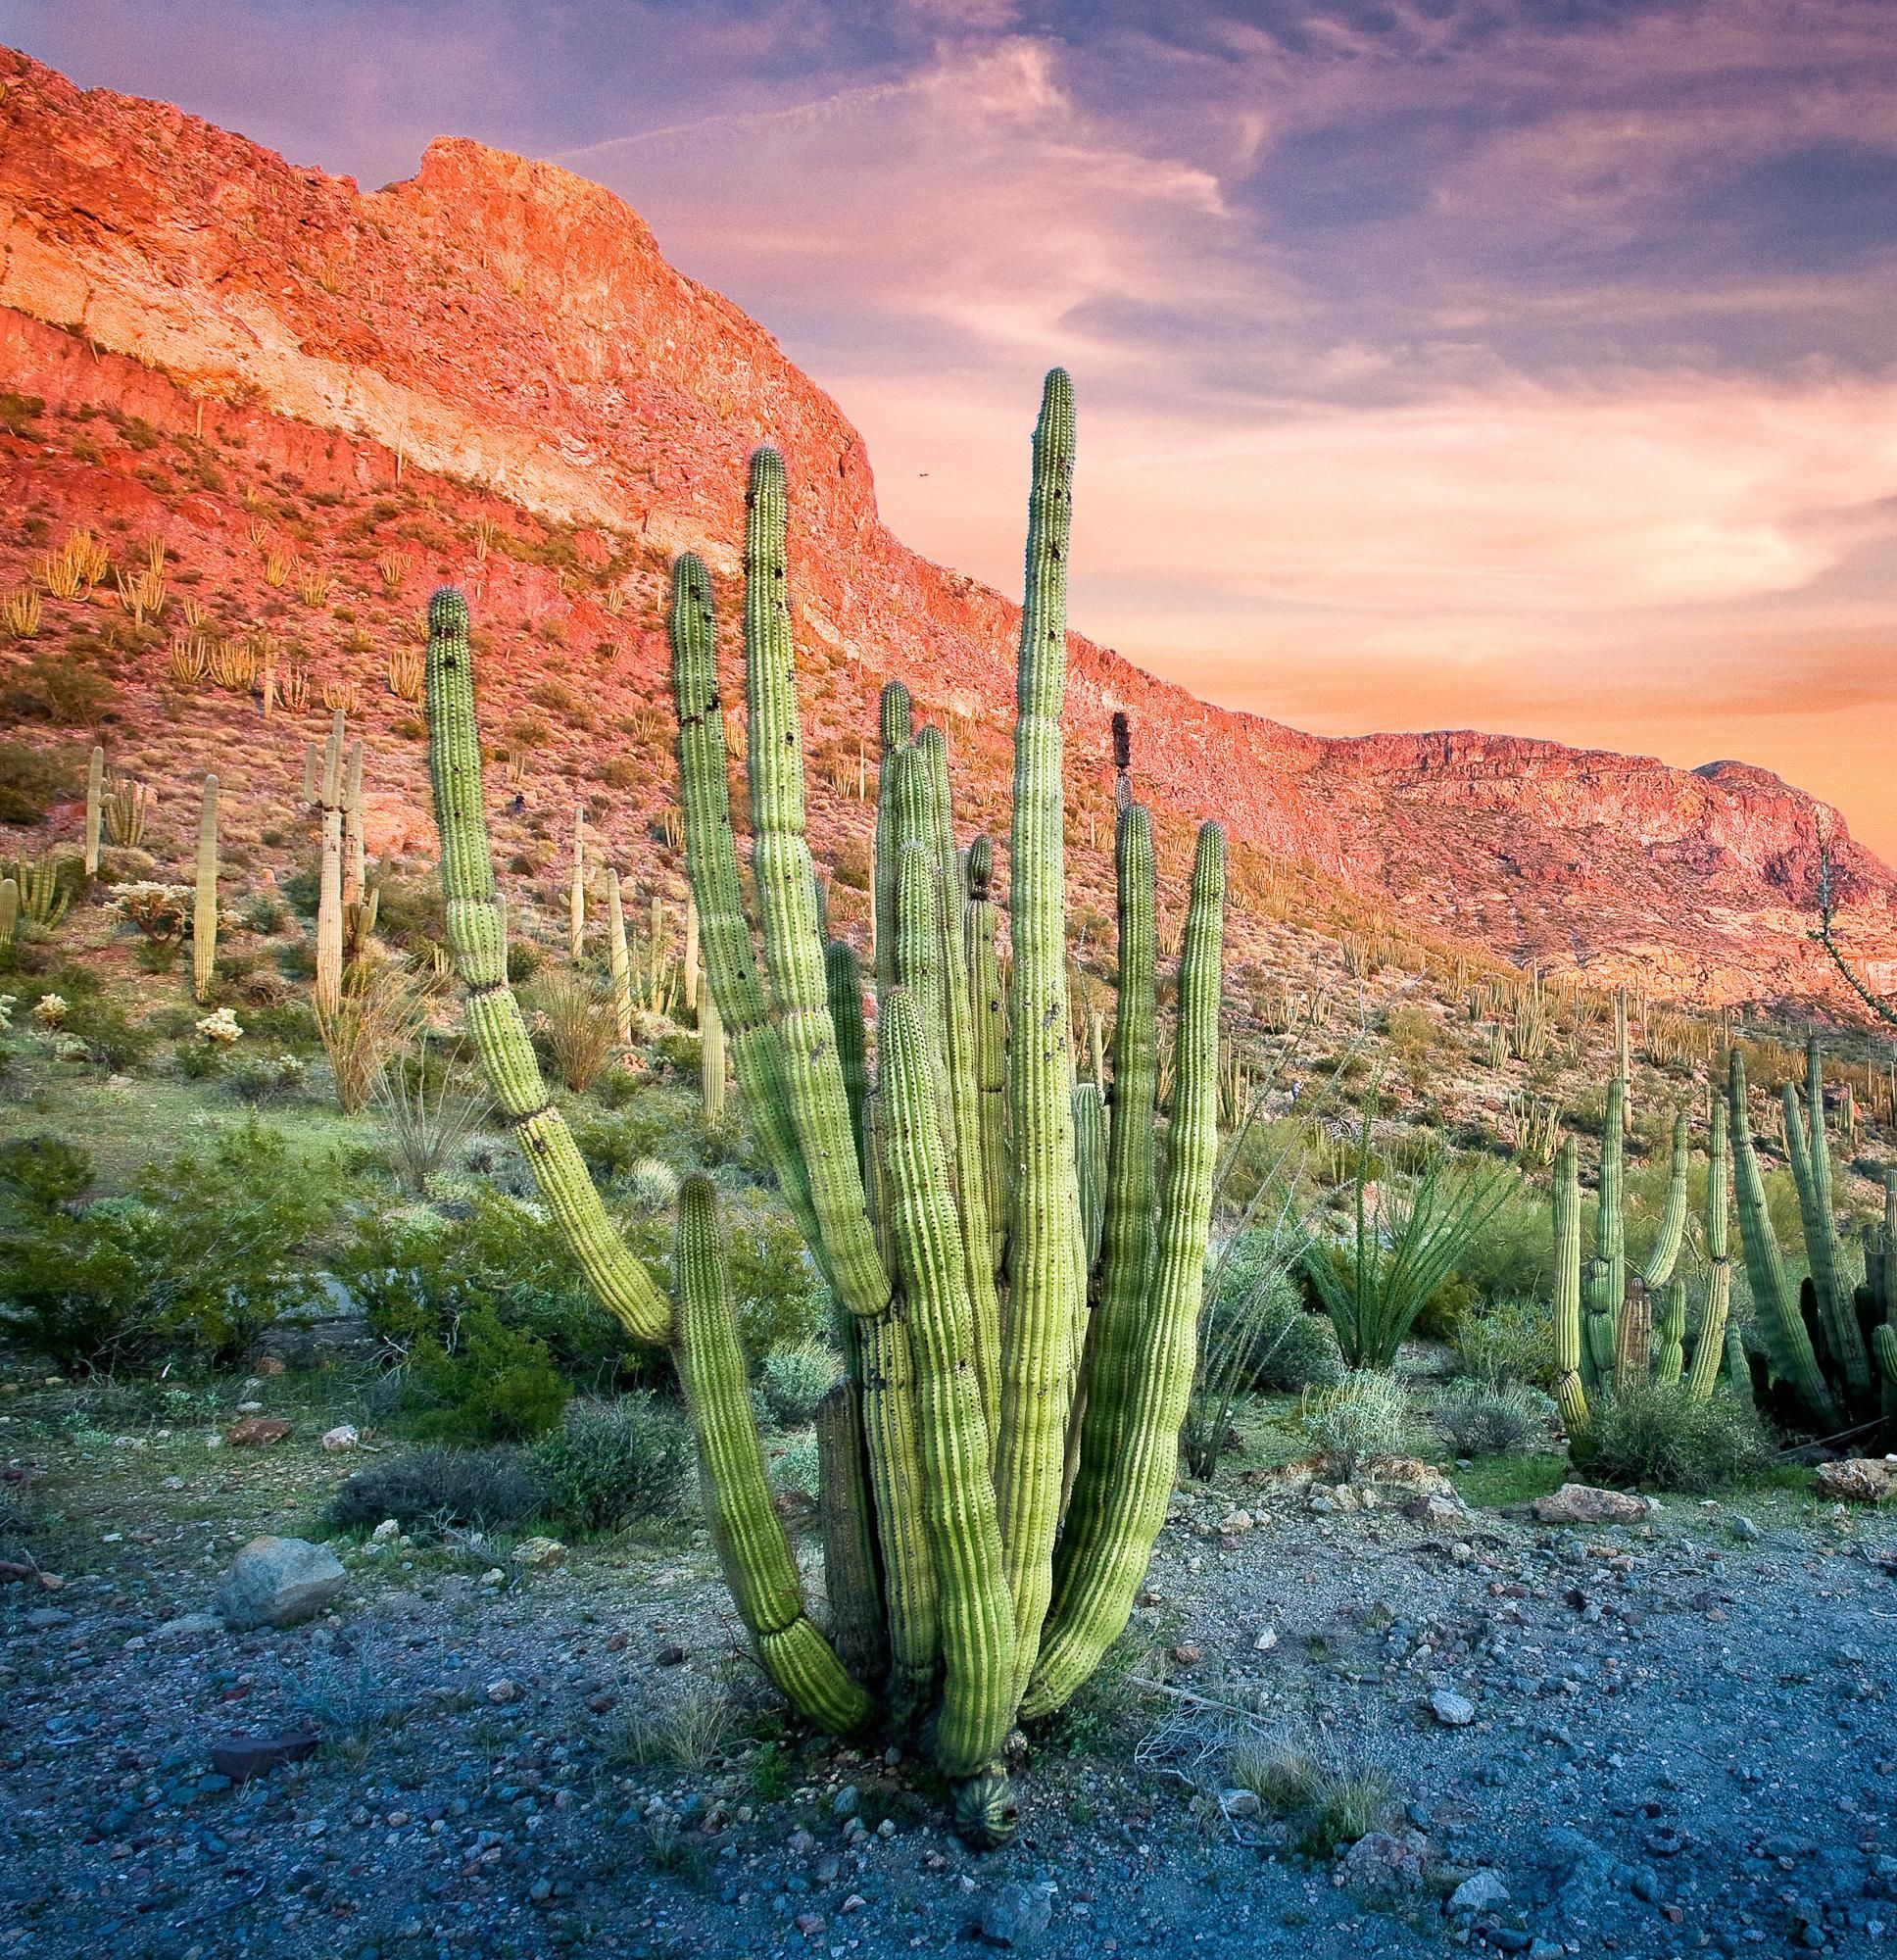 Visit the only place in the U.S. where you can see large stands of organ pipe cacti.